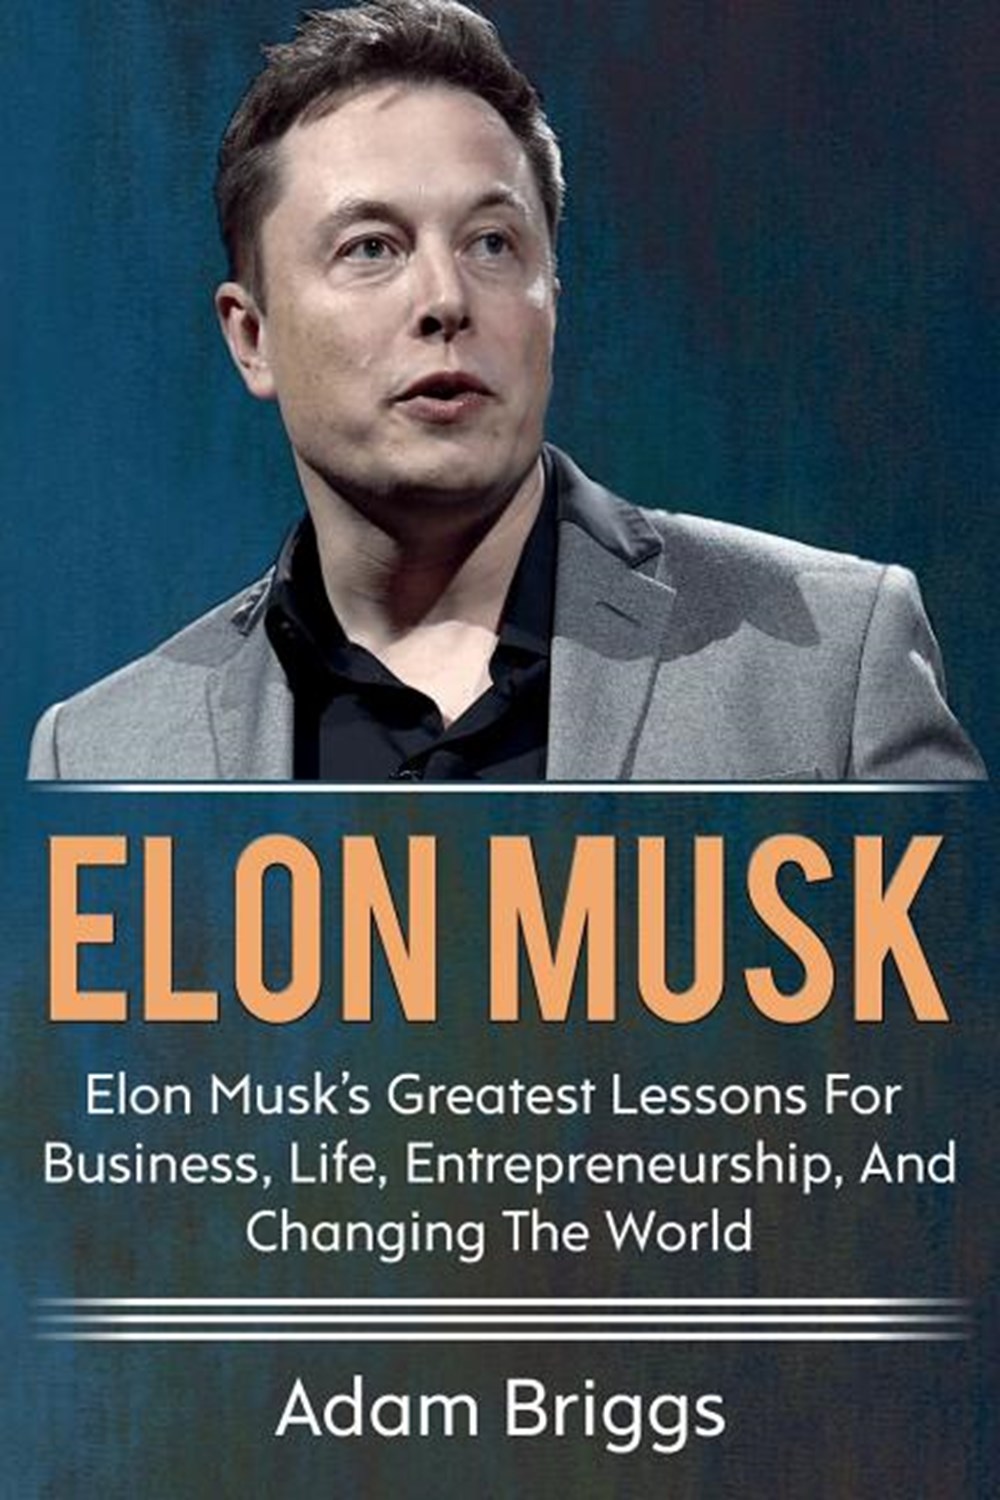 Elon Musk Elon Musk's greatest lessons for business, life, entrepreneurship, and changing the world!